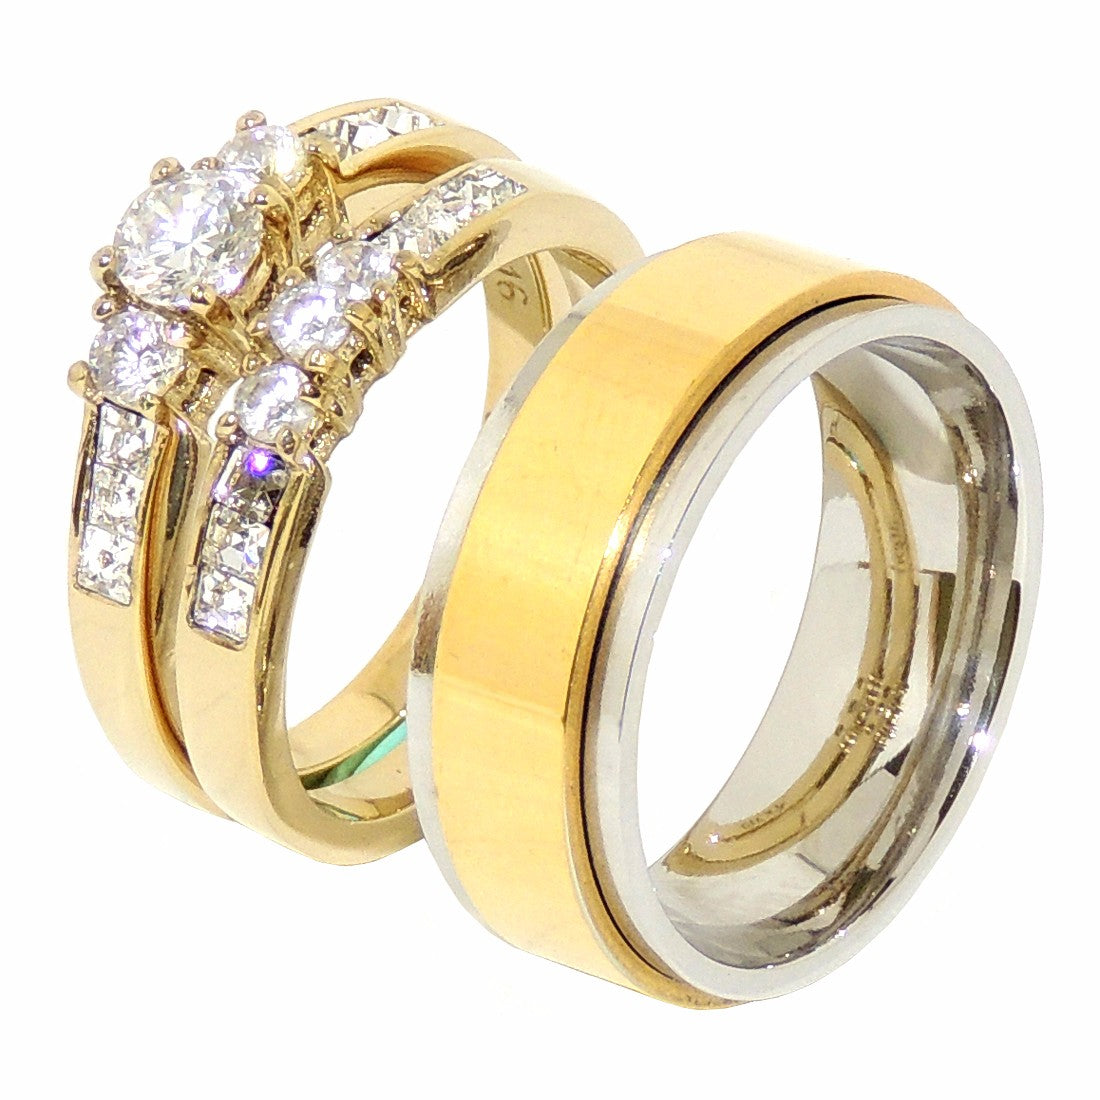 Couple Rings Set Crystal Square Cubic Zircon Engagement Wedding Ring - Size  7 (Gold Color) - Walmart.com